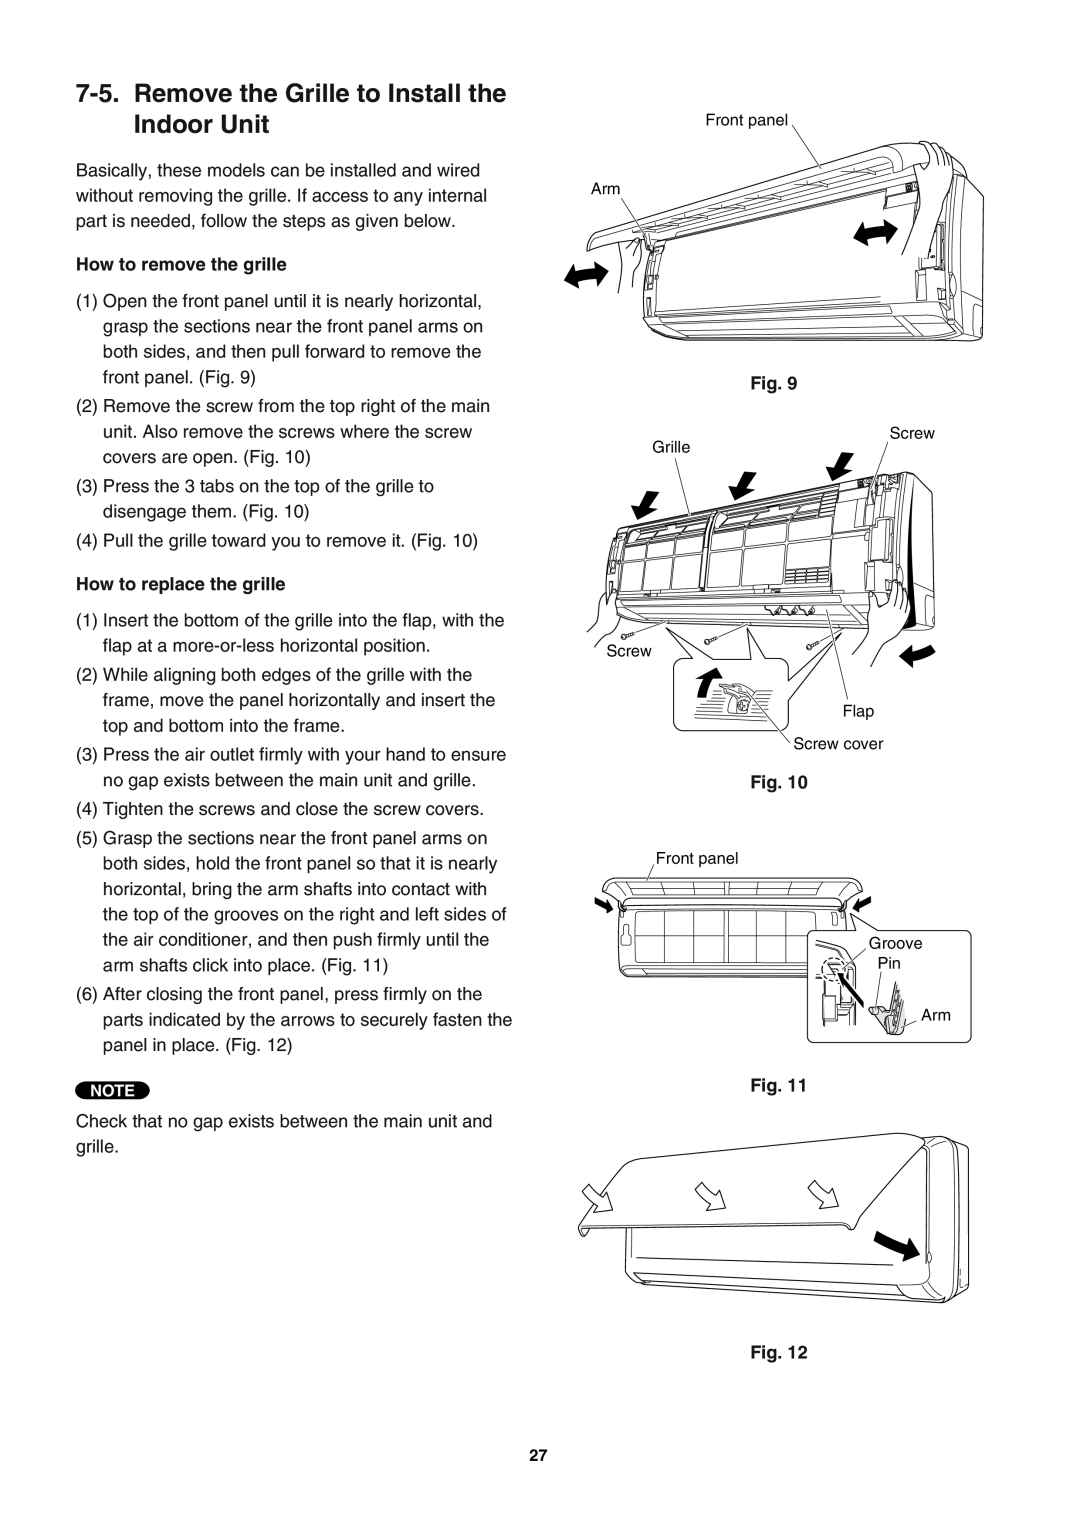 Sanyo SAP-KRV94EHDX Remove the Grille to Install the Indoor Unit, How to remove the grille, How to replace the grille 